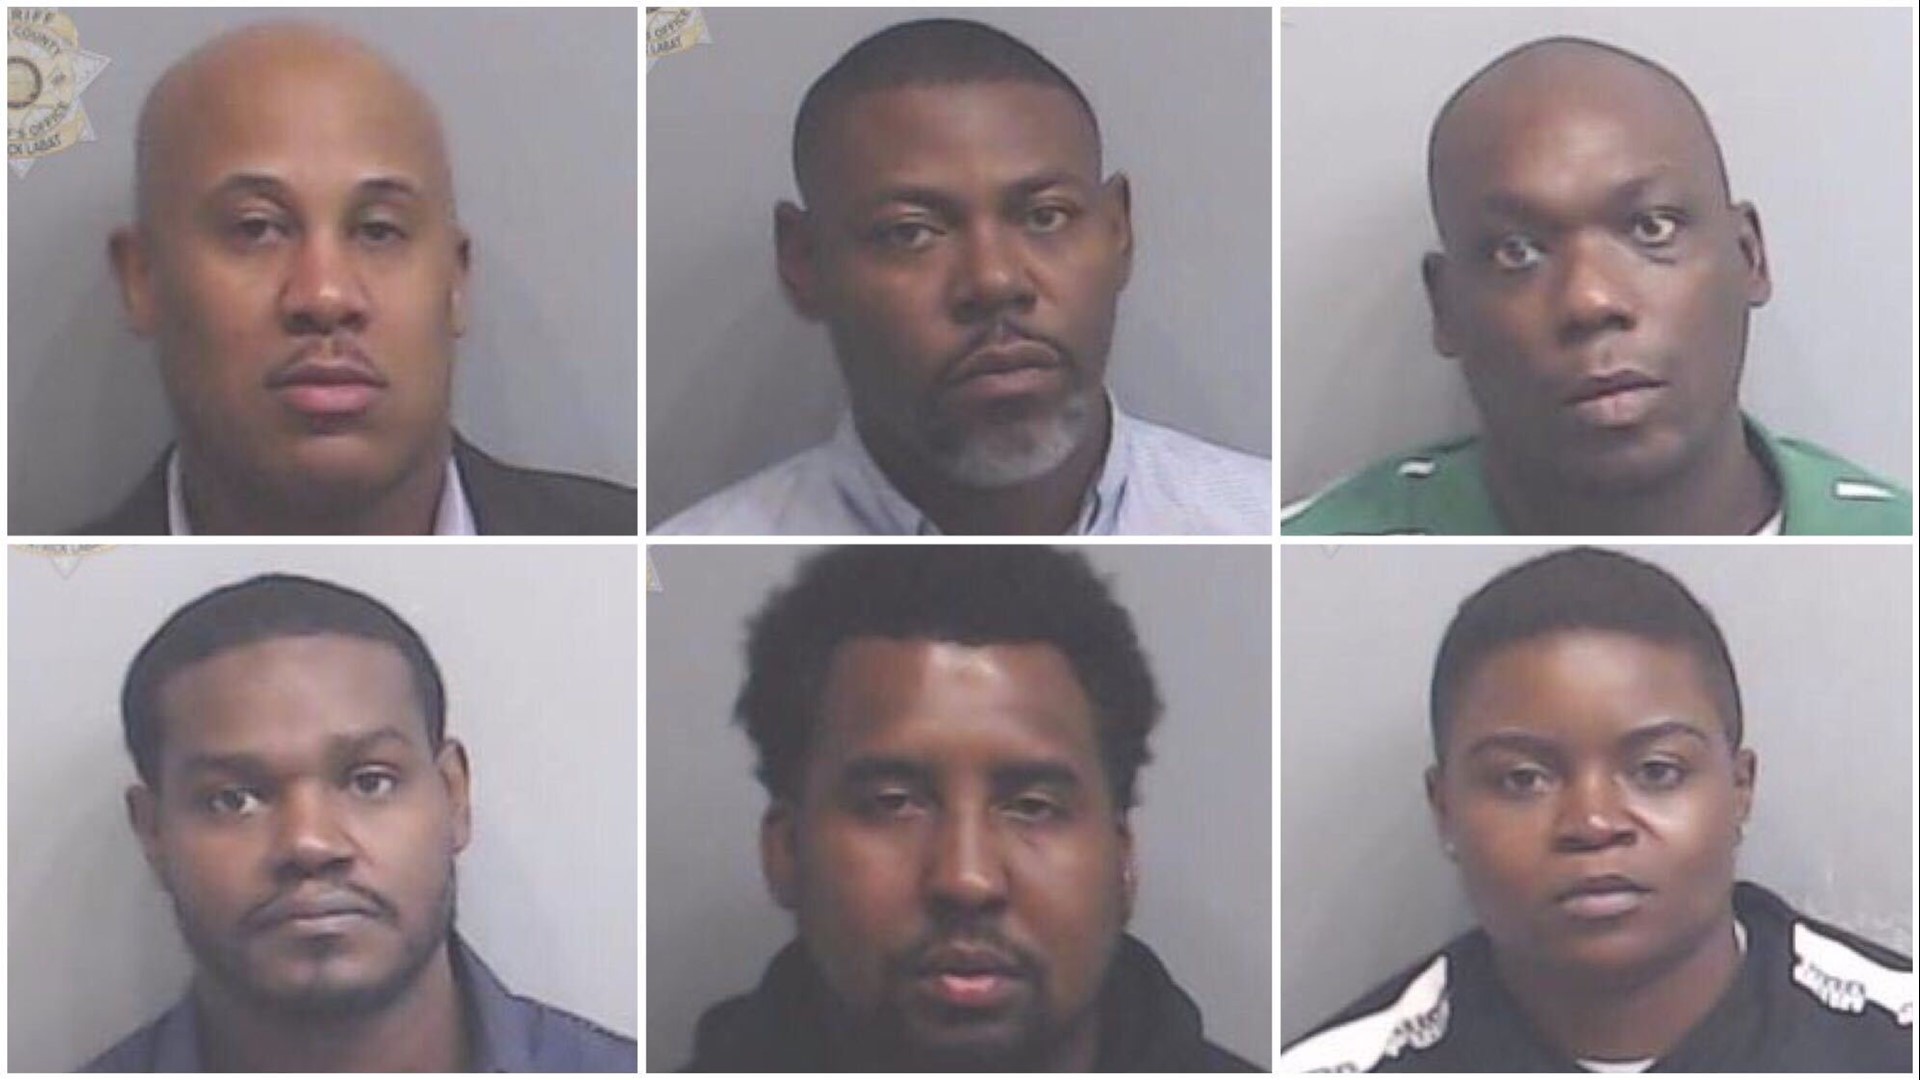 In November, the state announced charges against deputies Arron Cook, Guito Dela Cruz, Omar Jackson, Jason Roache, Kenesia Strowder and William Whitaker in the case.